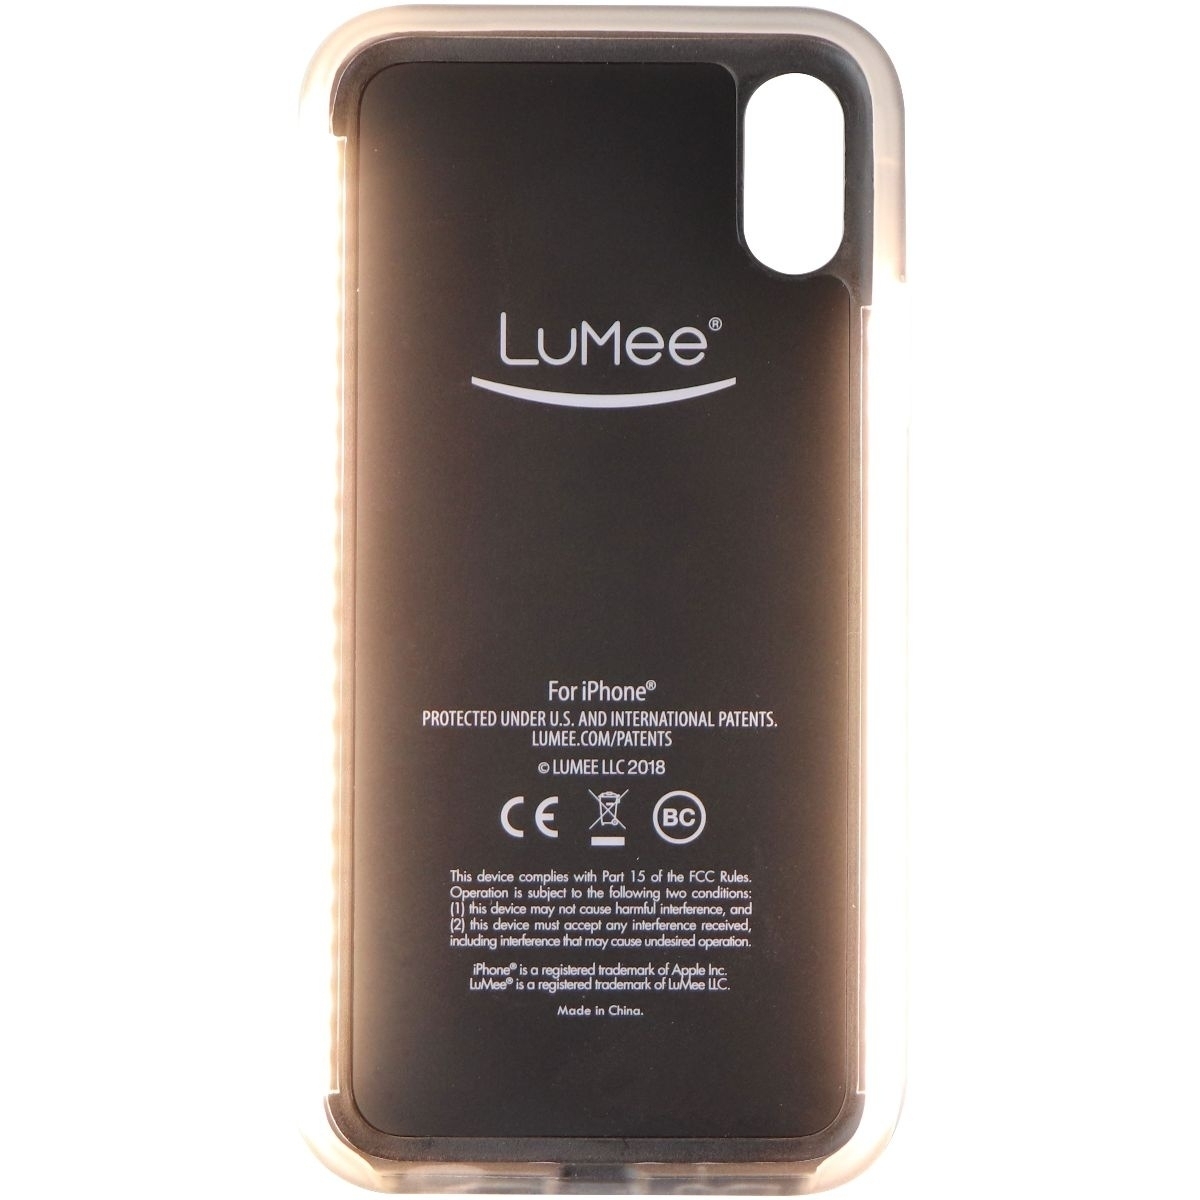 LuMee Duo Selfie LED Case For IPhone Xs / IPhone X - White Marble